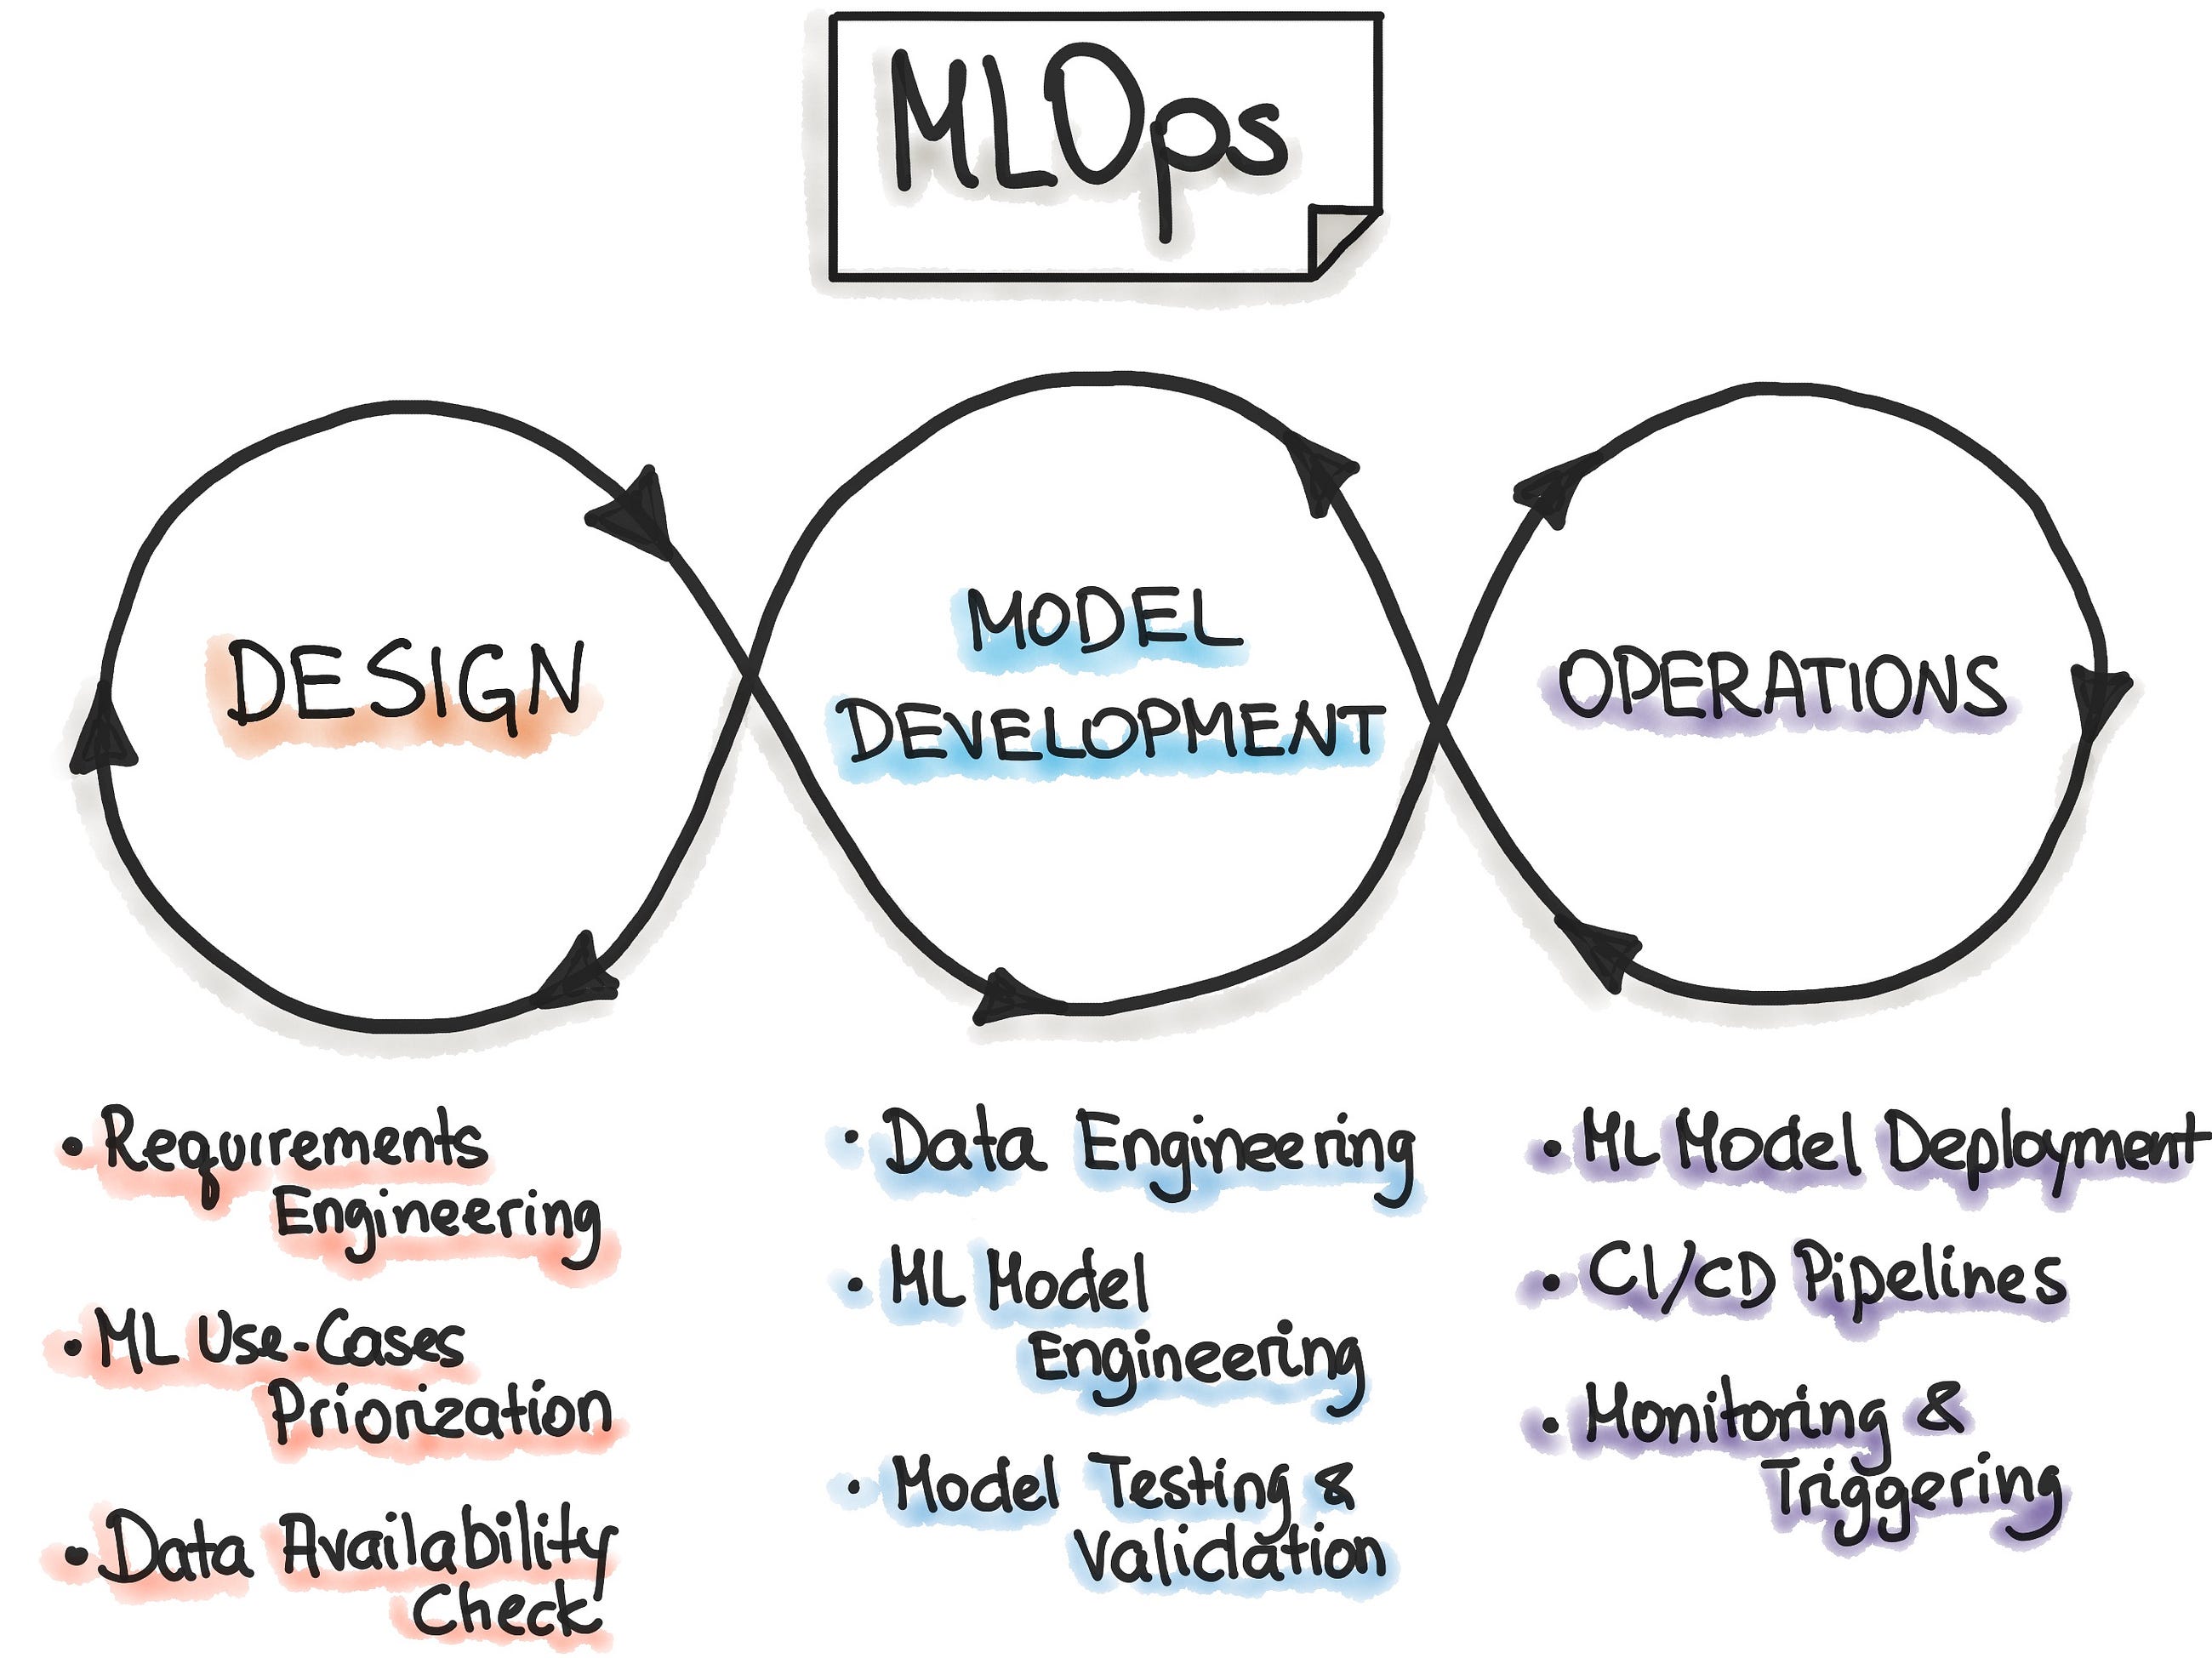 Introduction to MLOps for Data Science